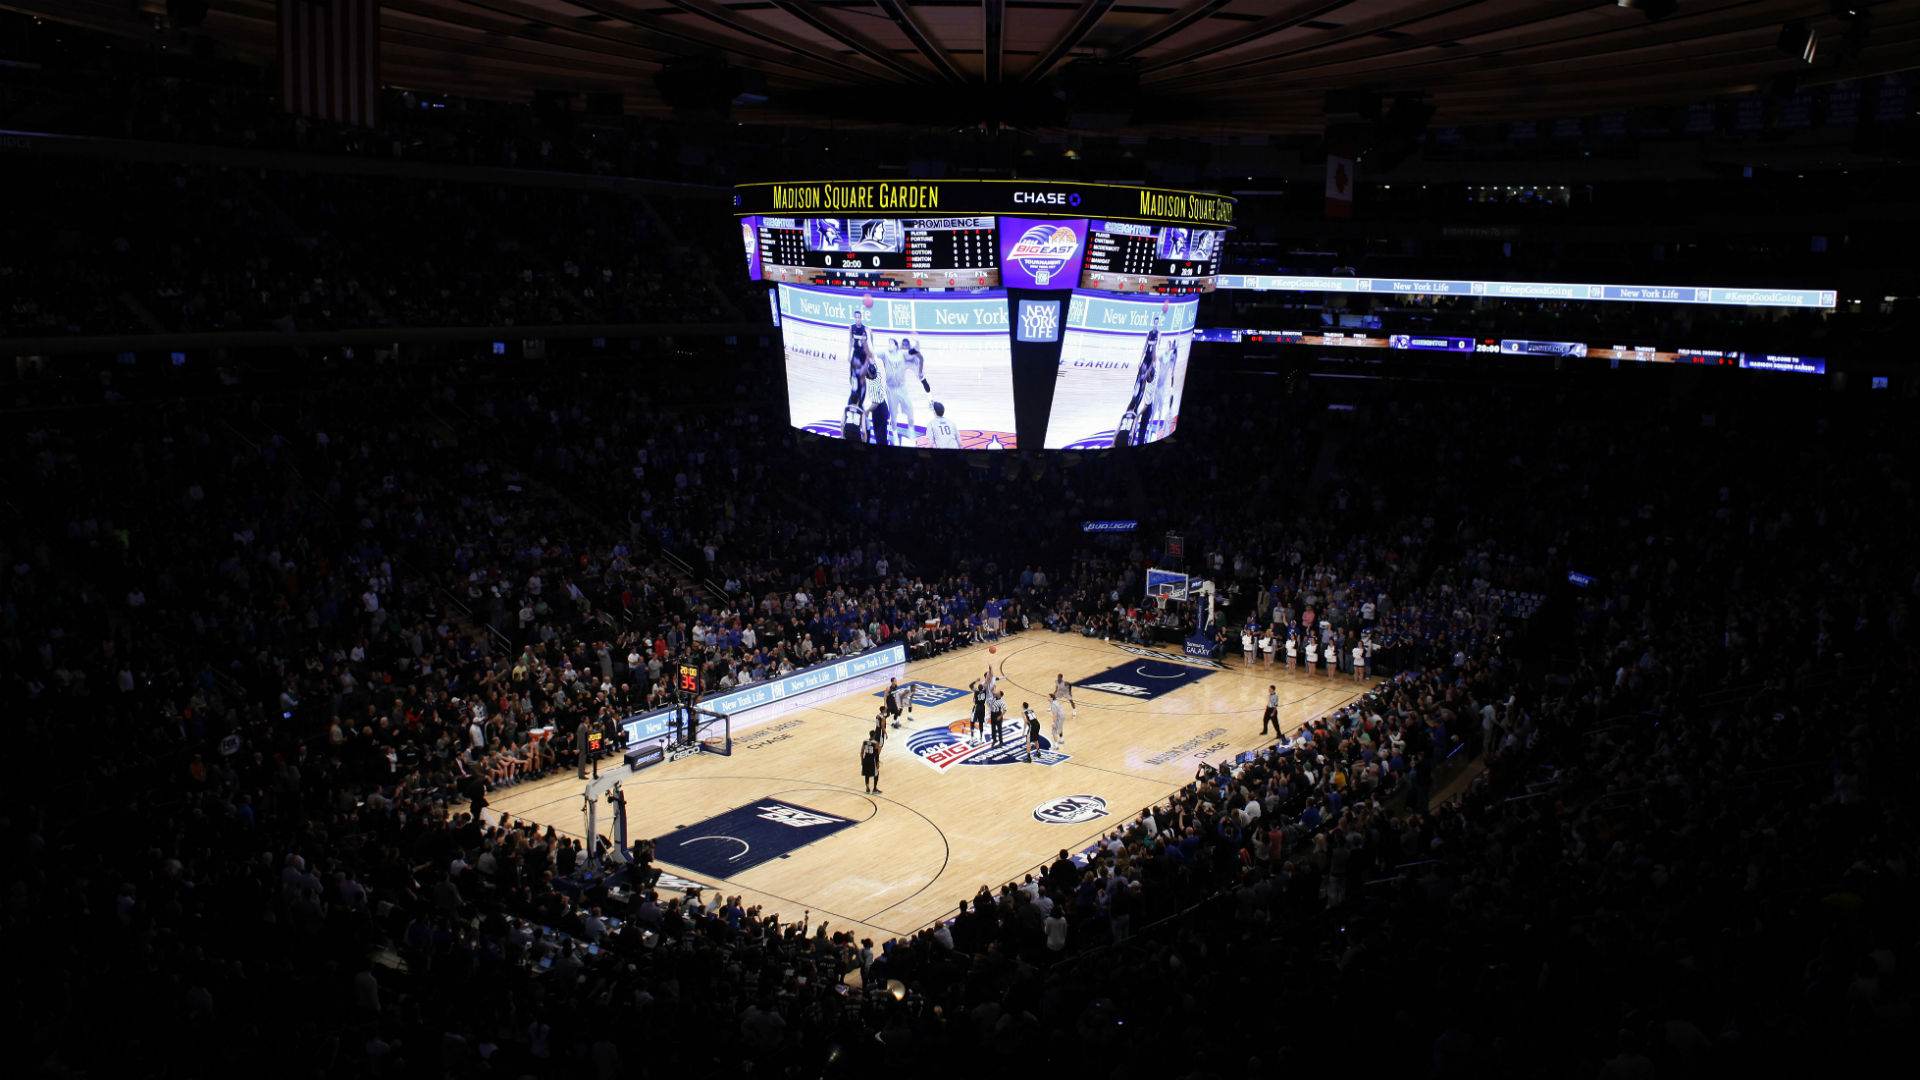 2015 Big East Tournament Schedule, TV and location NCAA Basketball